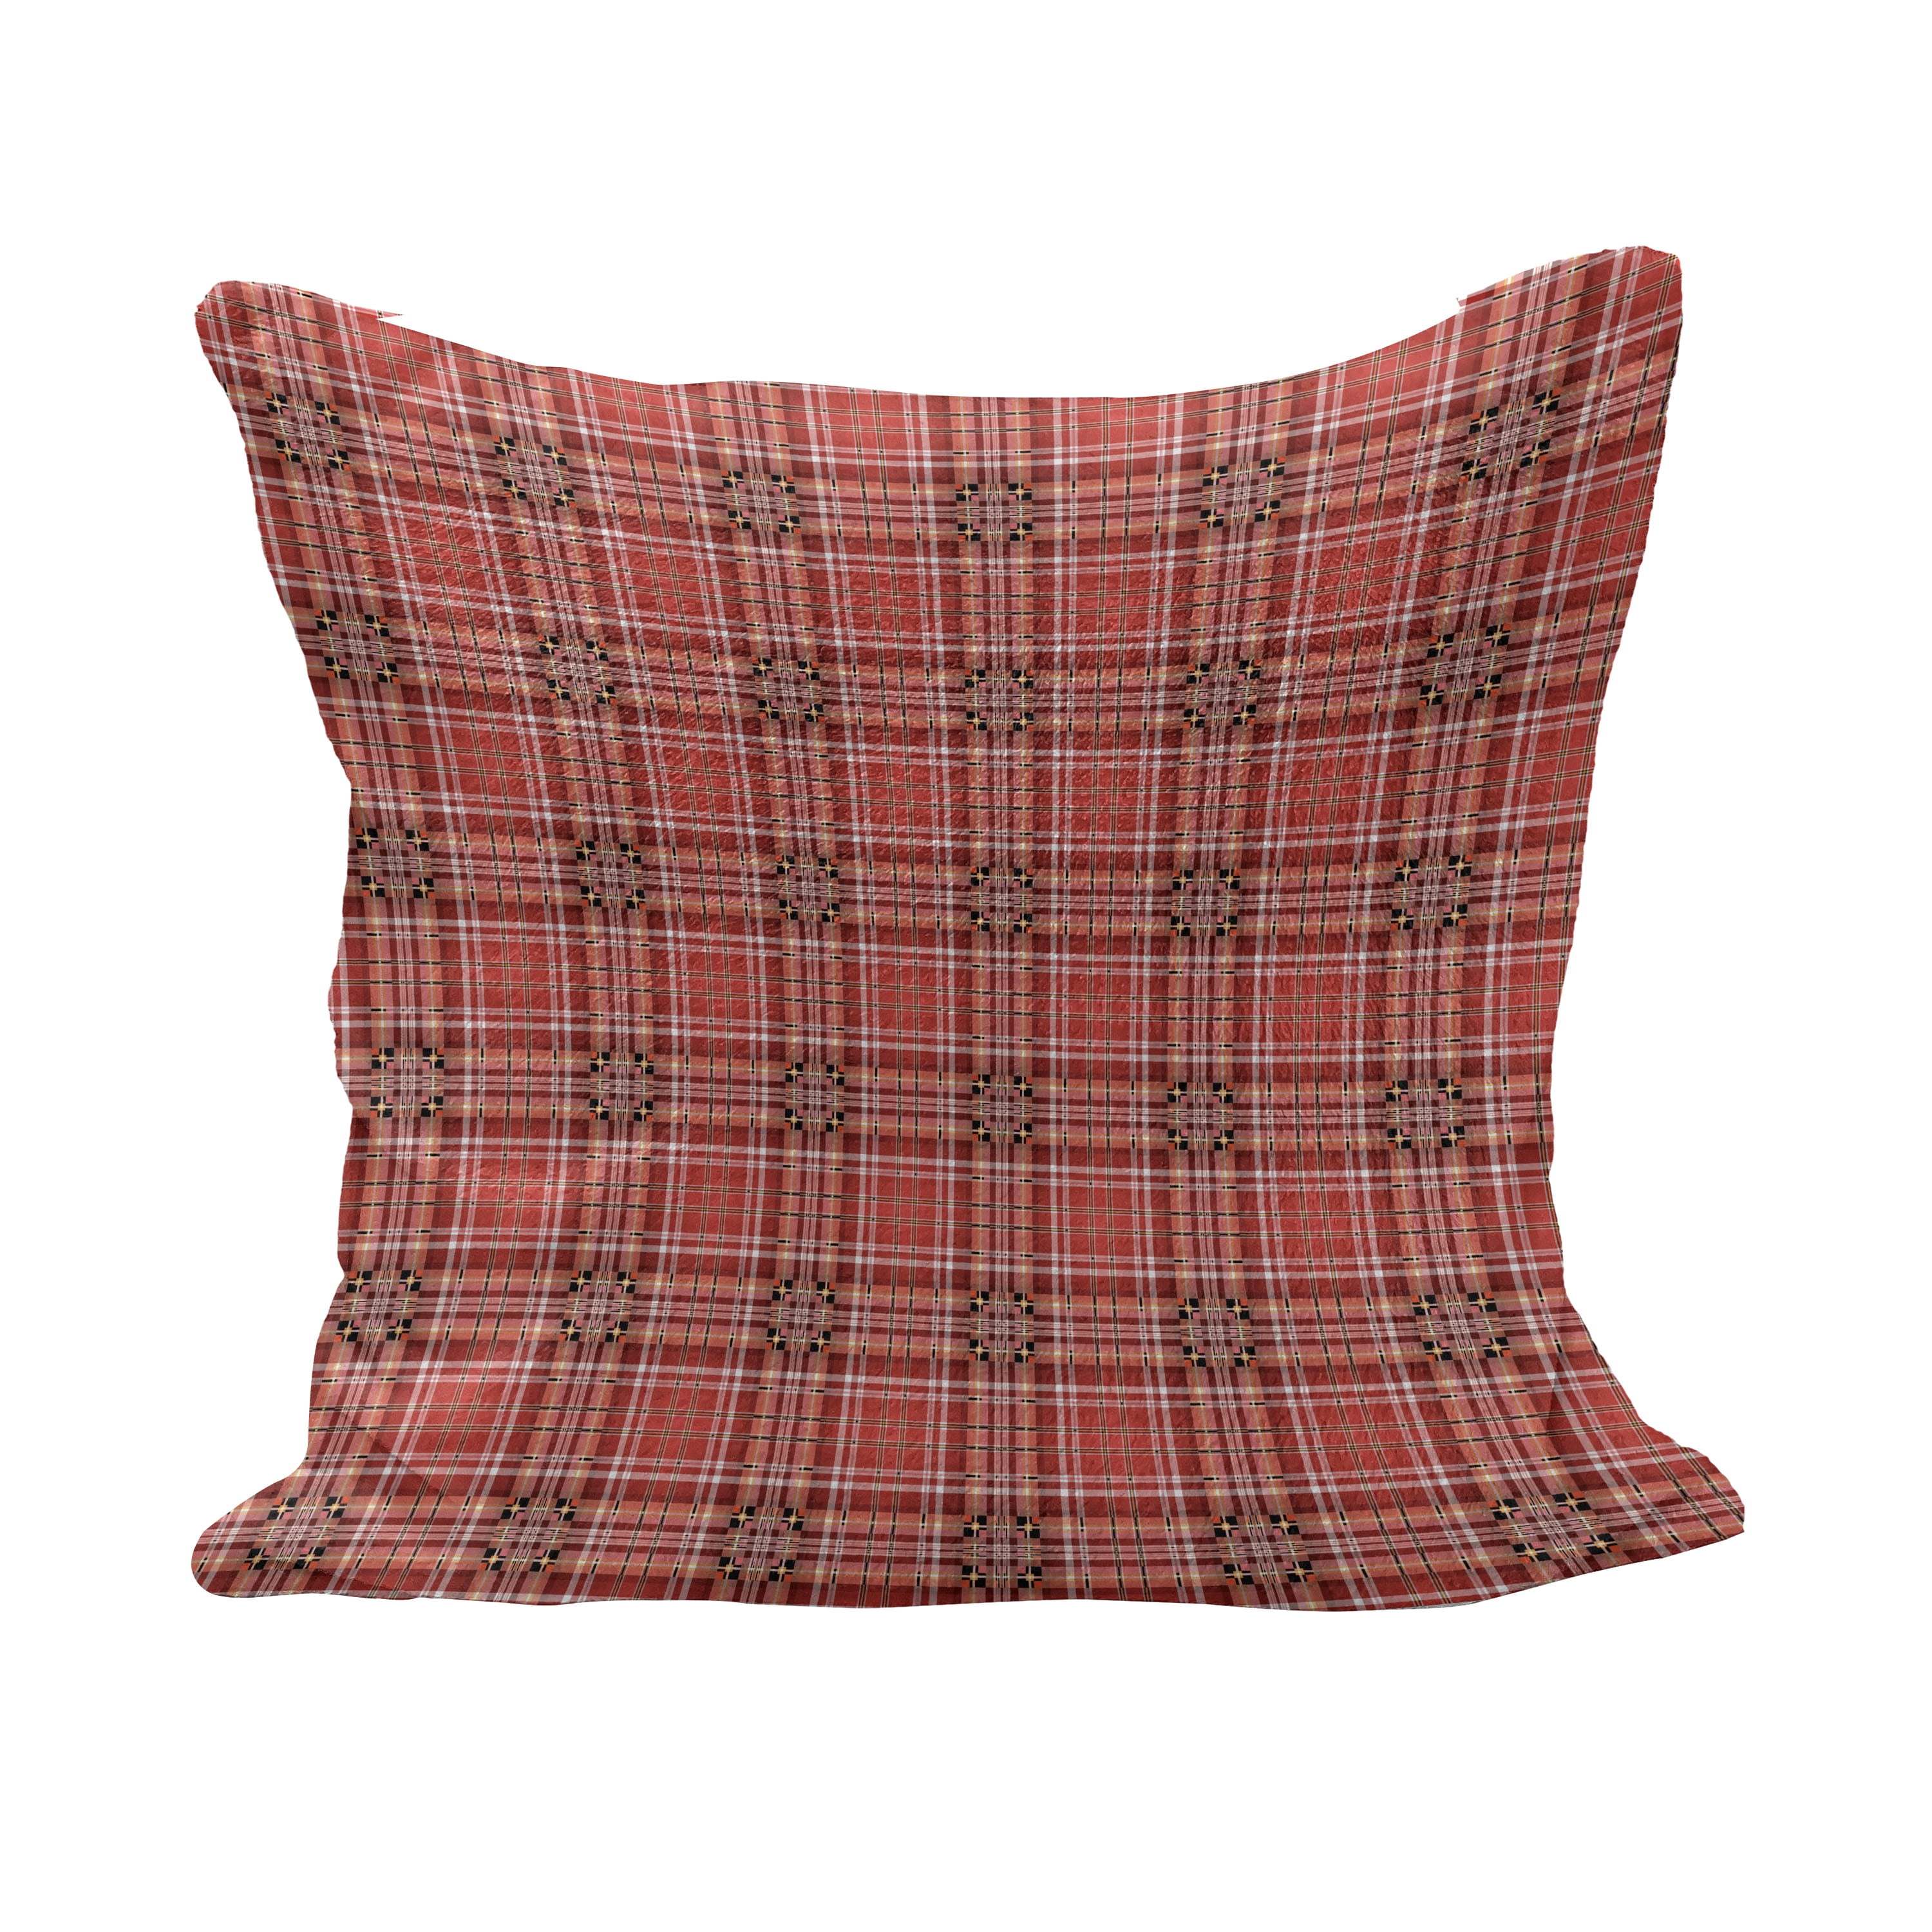 Multicolor Design Minds Boutique Hand Drawn Checkerboard Pattern 18x18 Throw Pillow red/pink